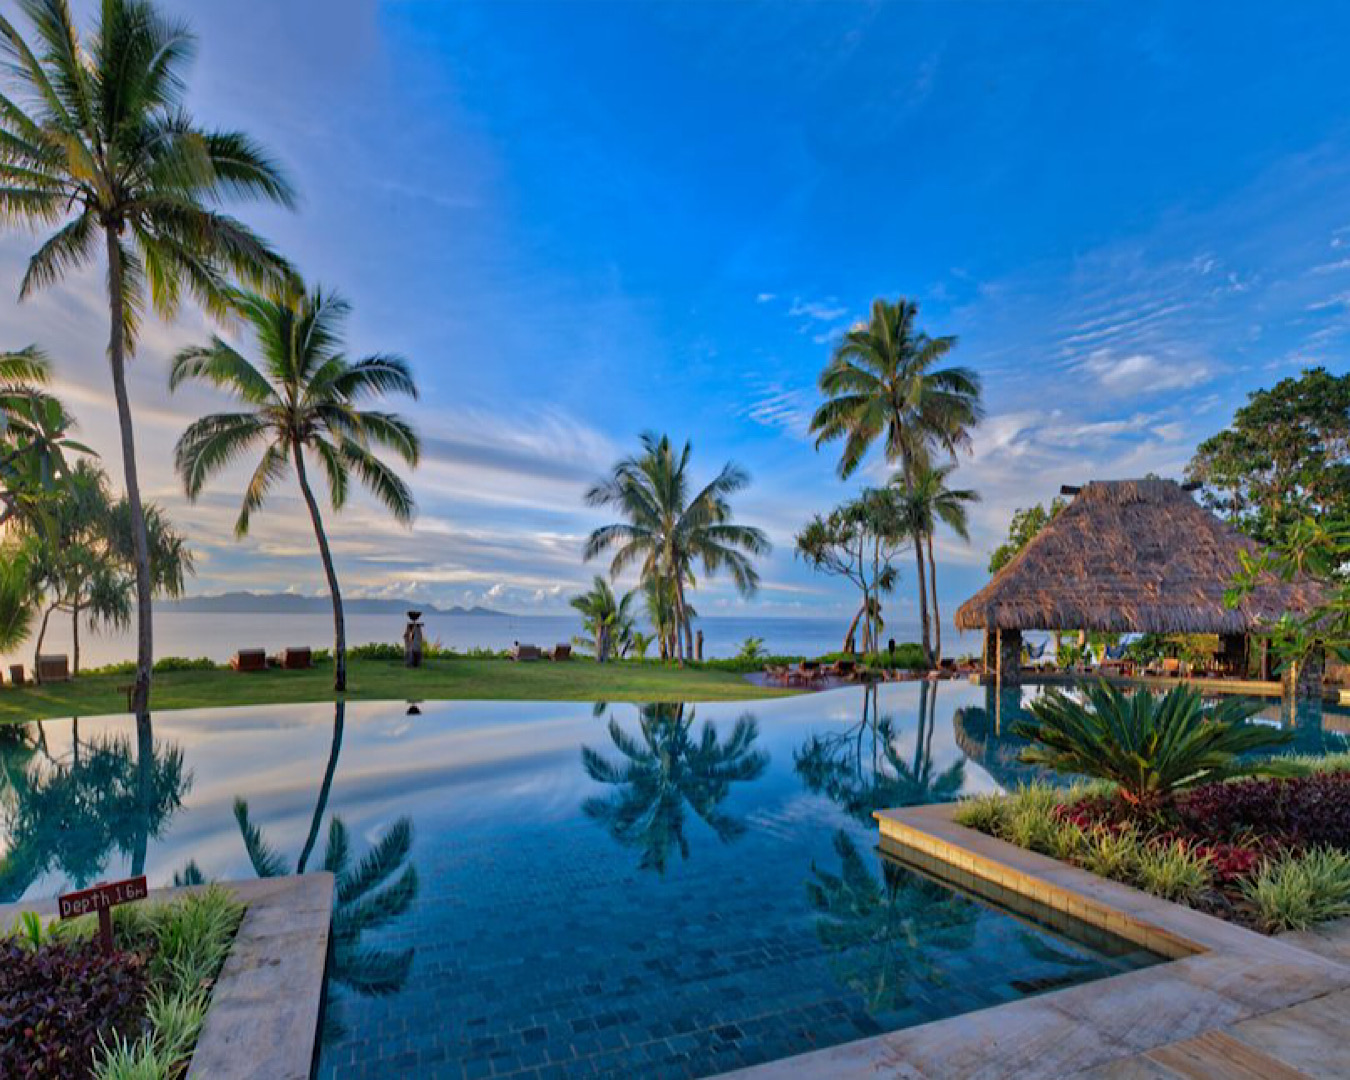 Nanuku Resort Fiji’s jaw-droppingly stunning clubhouse pool with palm tree reflections and a direct view of the ocean. 